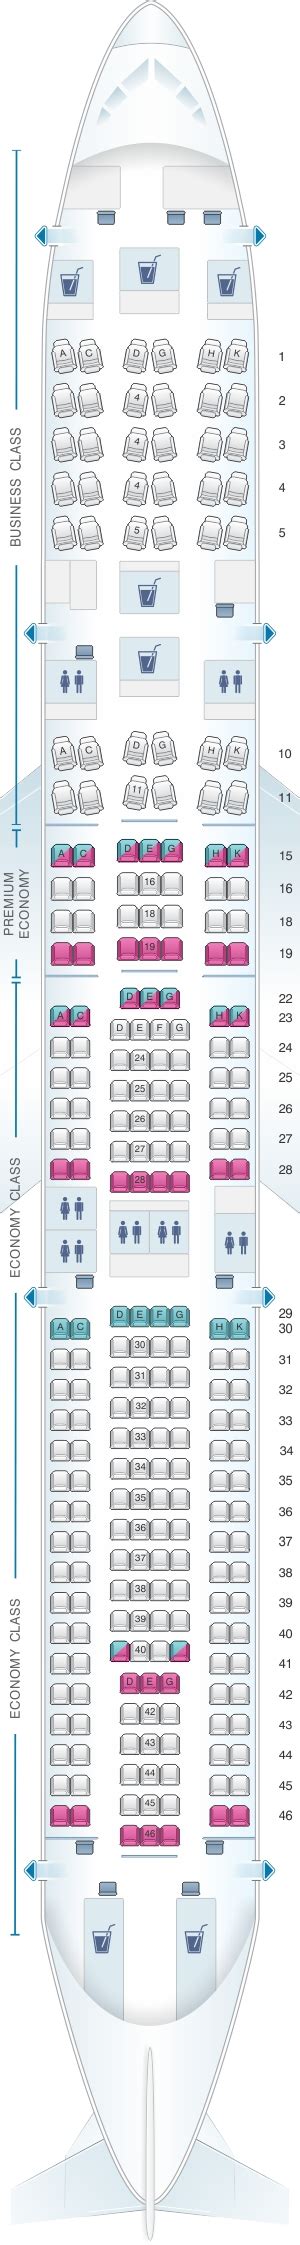 Airbus A Seat Map Hot Sex Picture